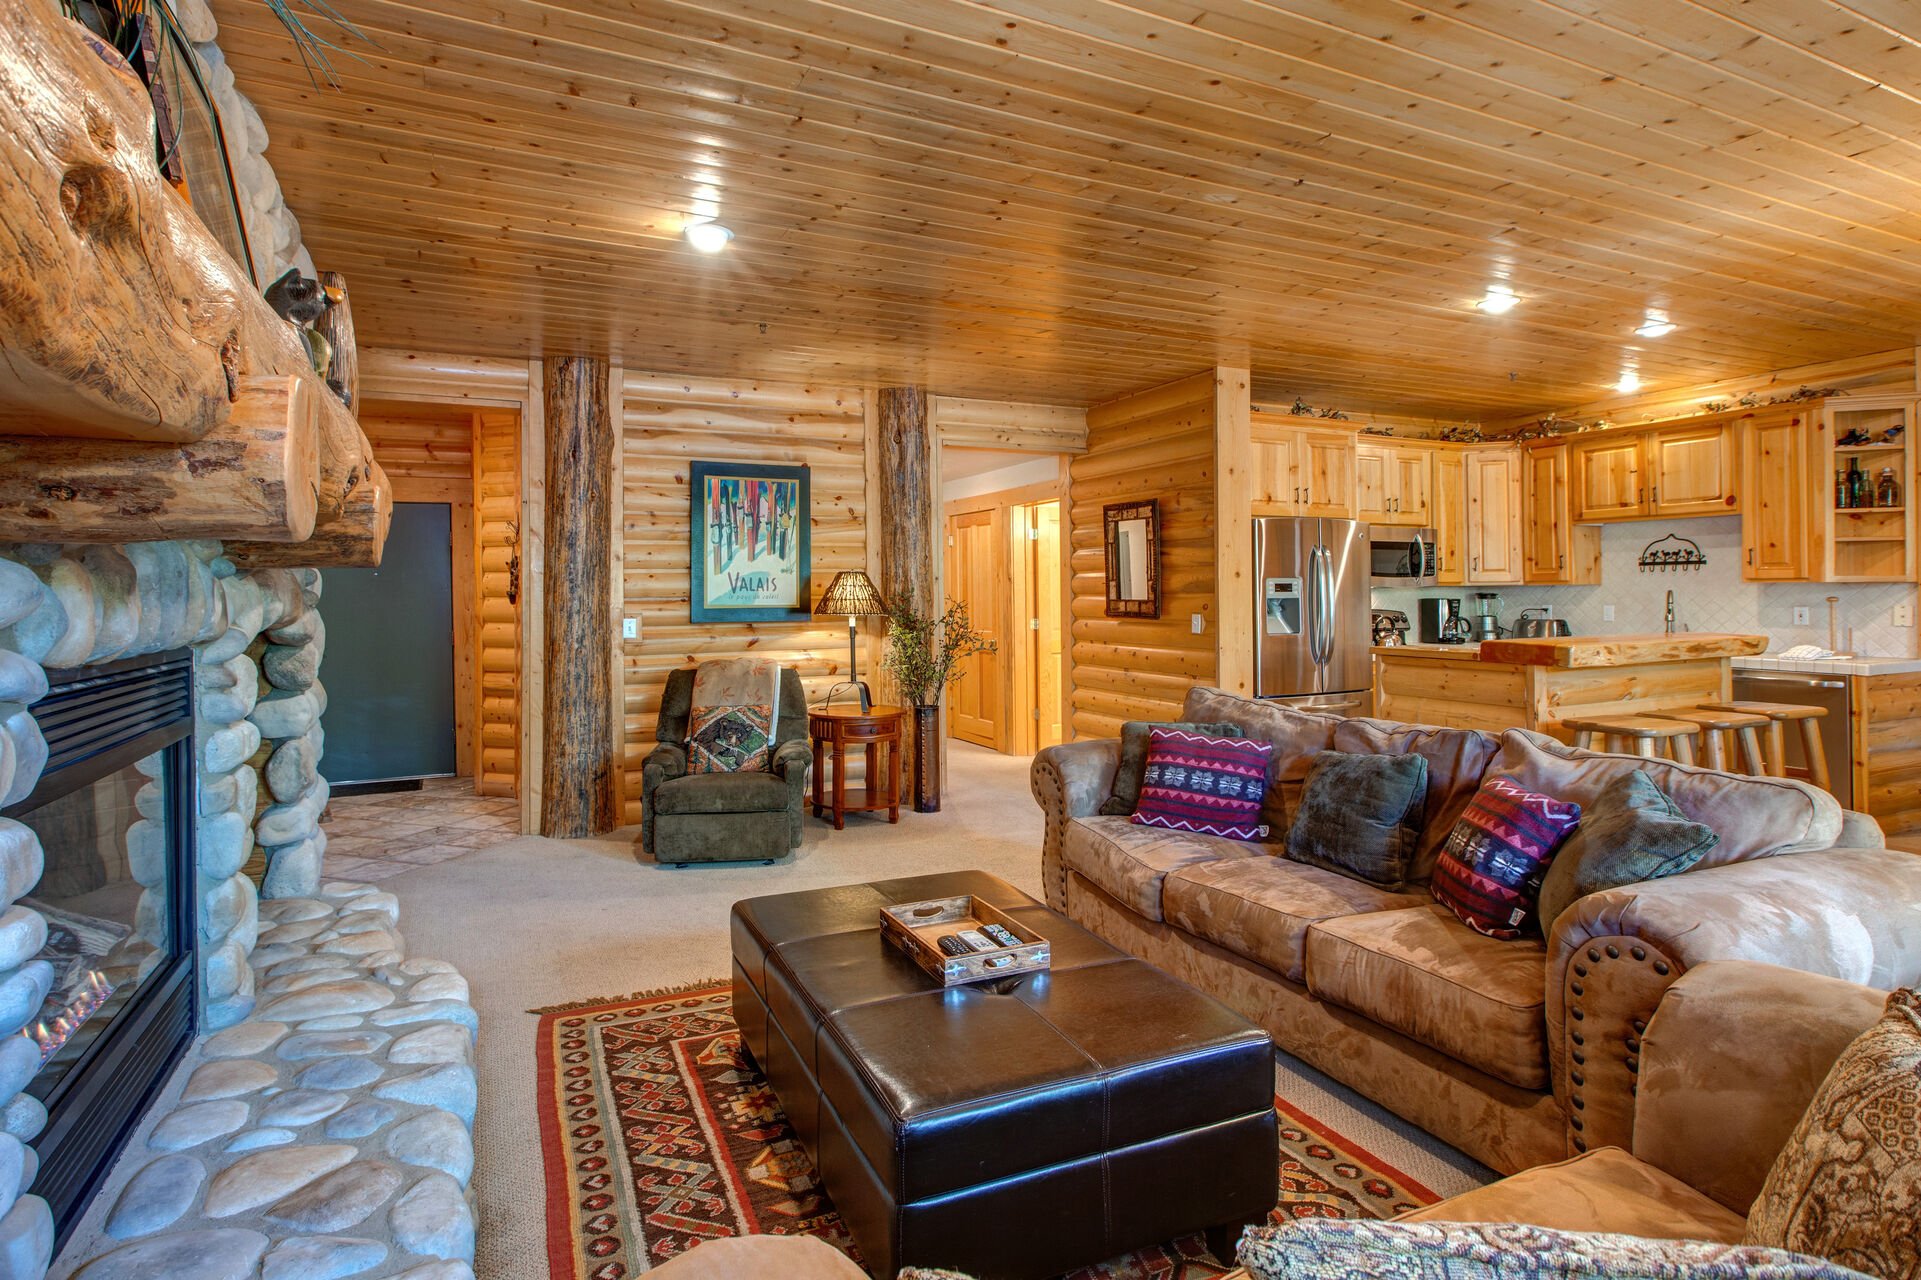 Comfortable and Inviting Log Cabin Design